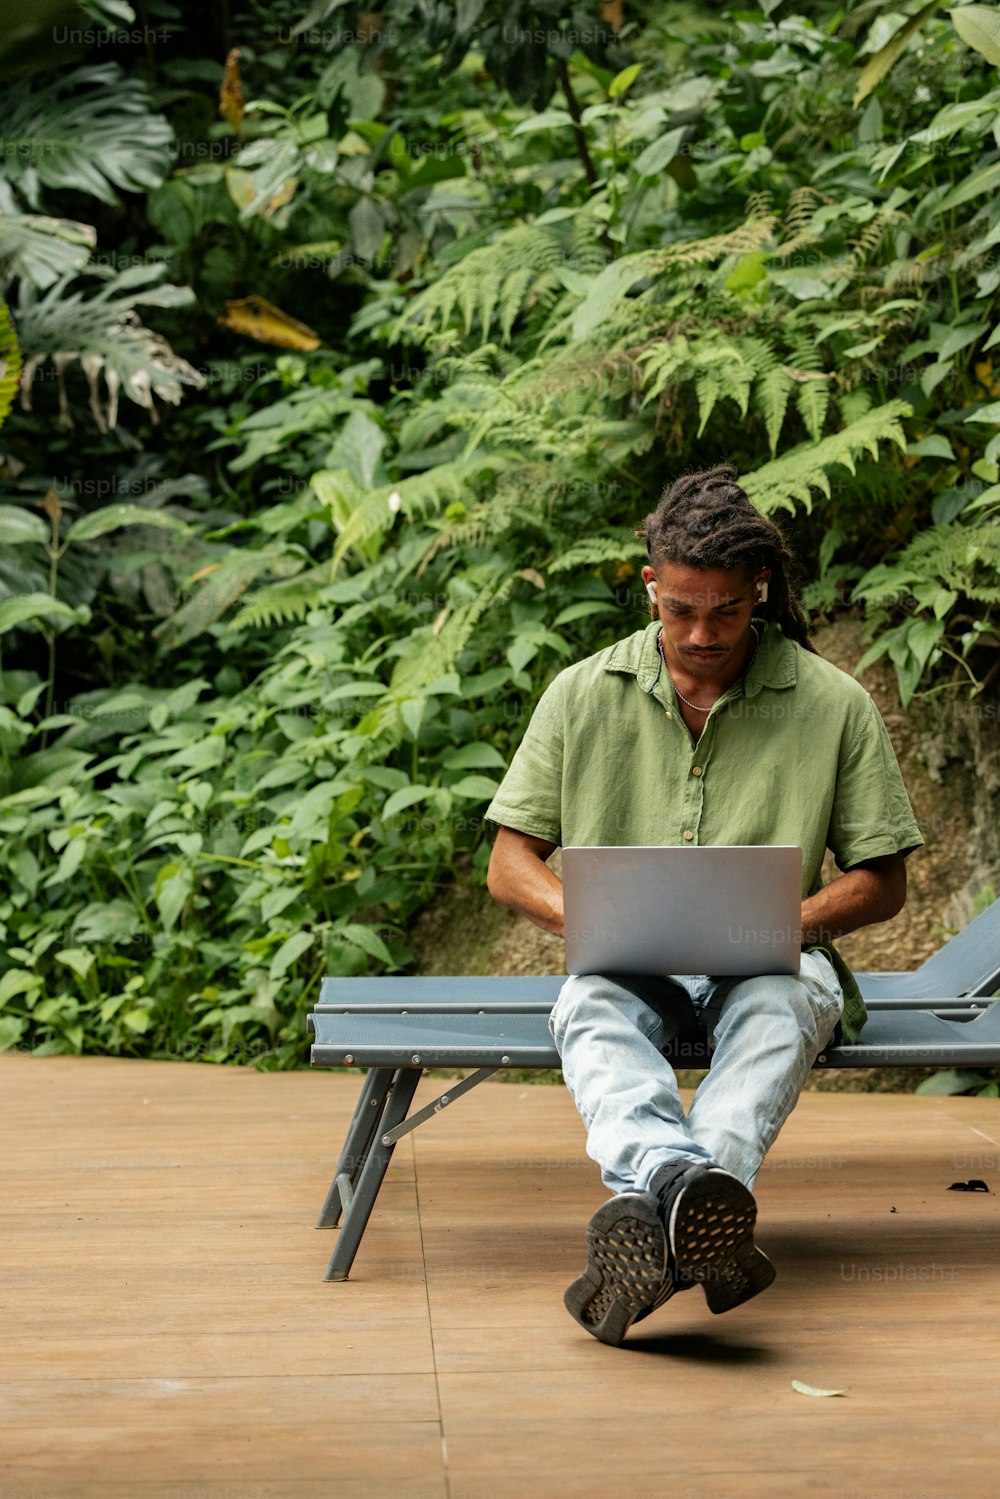 a man sitting on a bench using a laptop computer